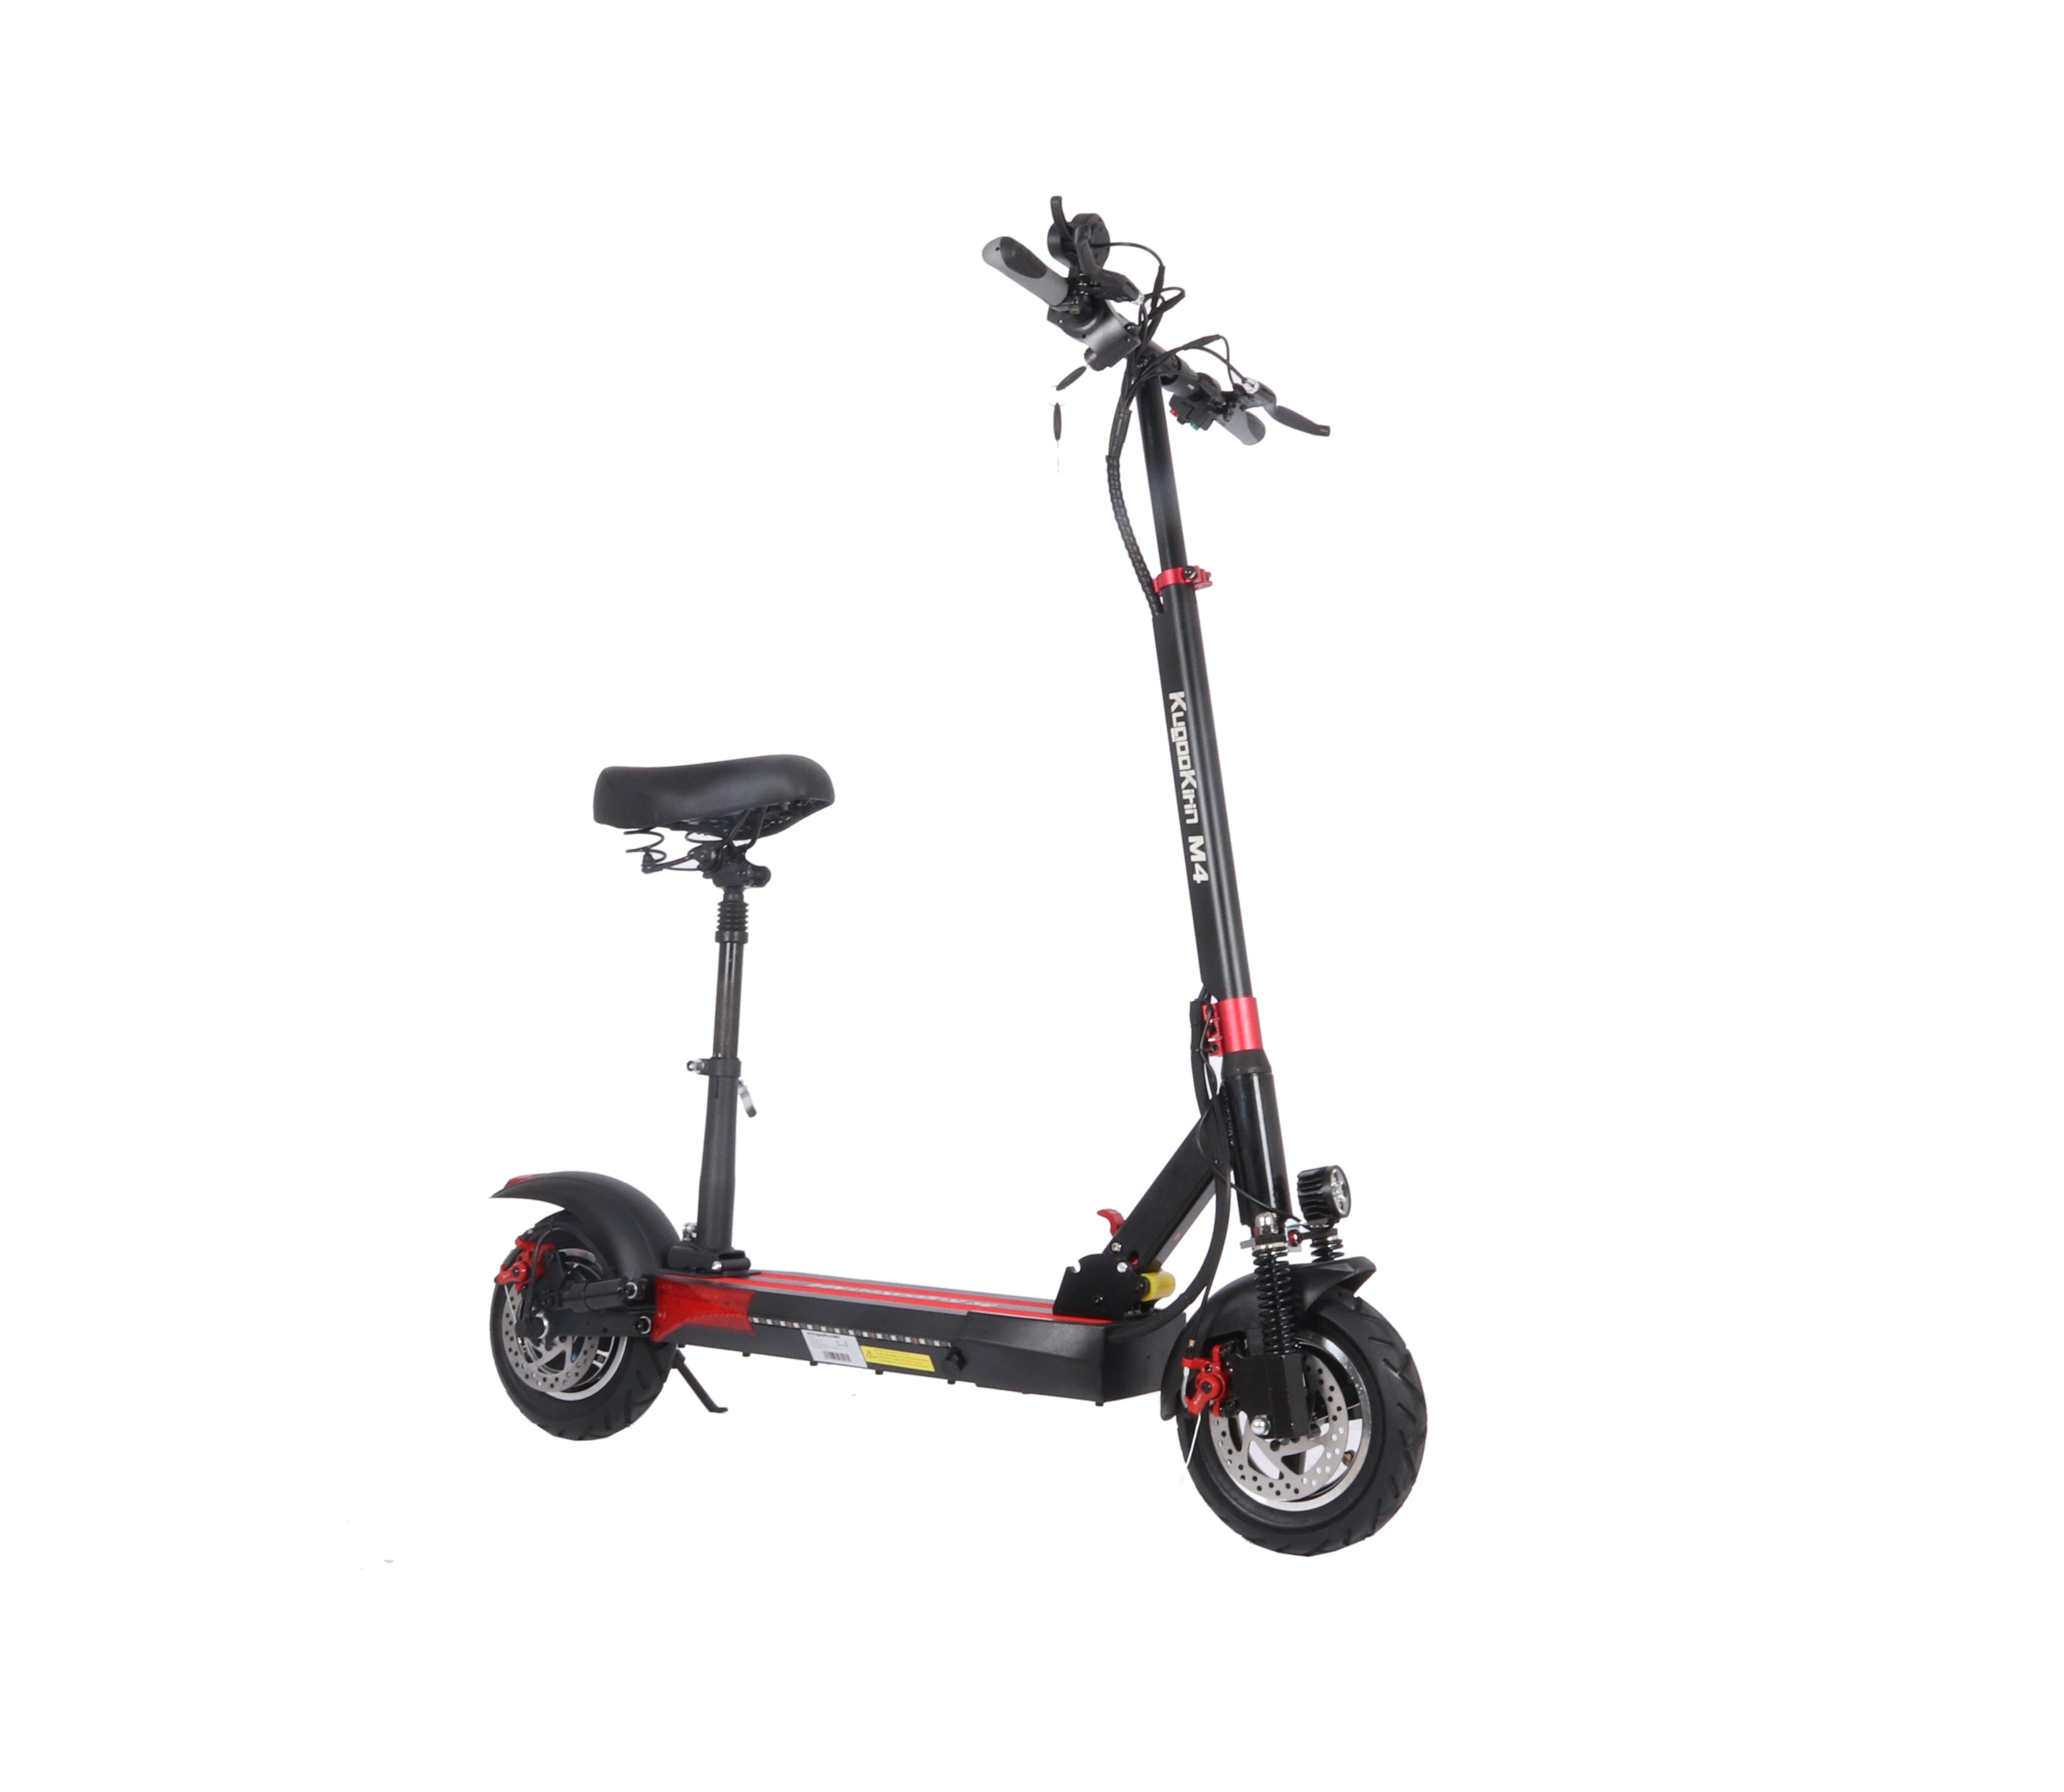 Get your Kugoo M4 Pro Electric Scooter today! – Scoot City Ltd